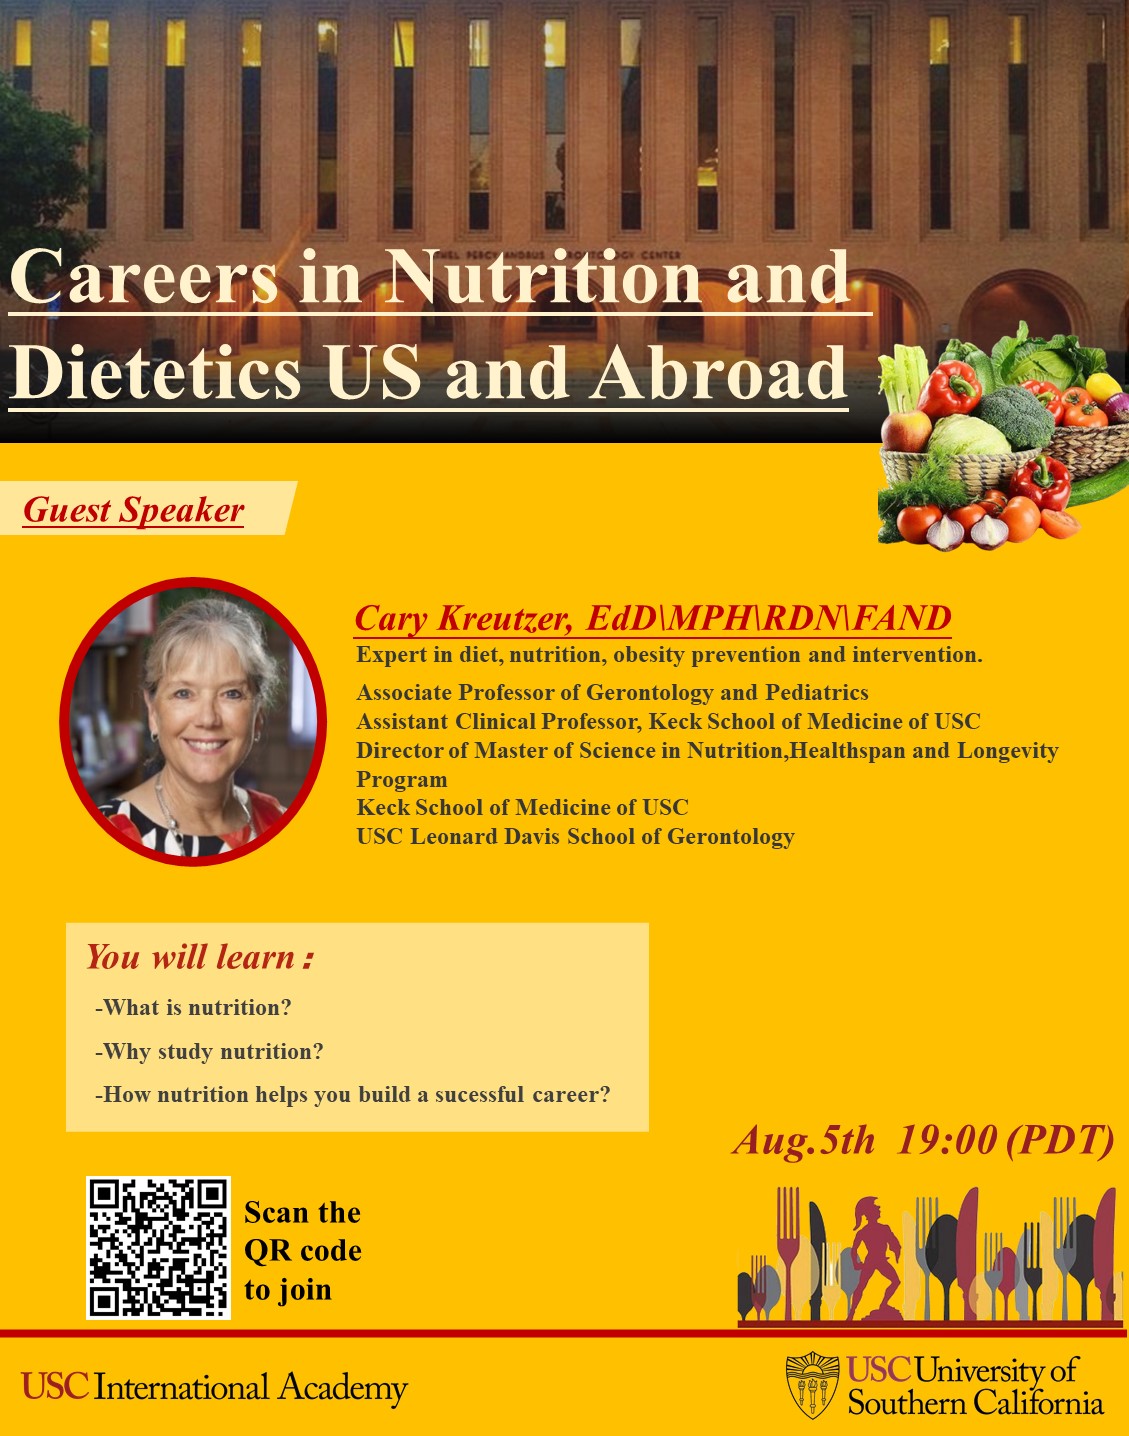 Careers in Nutrition and Dietetics US and Abroad